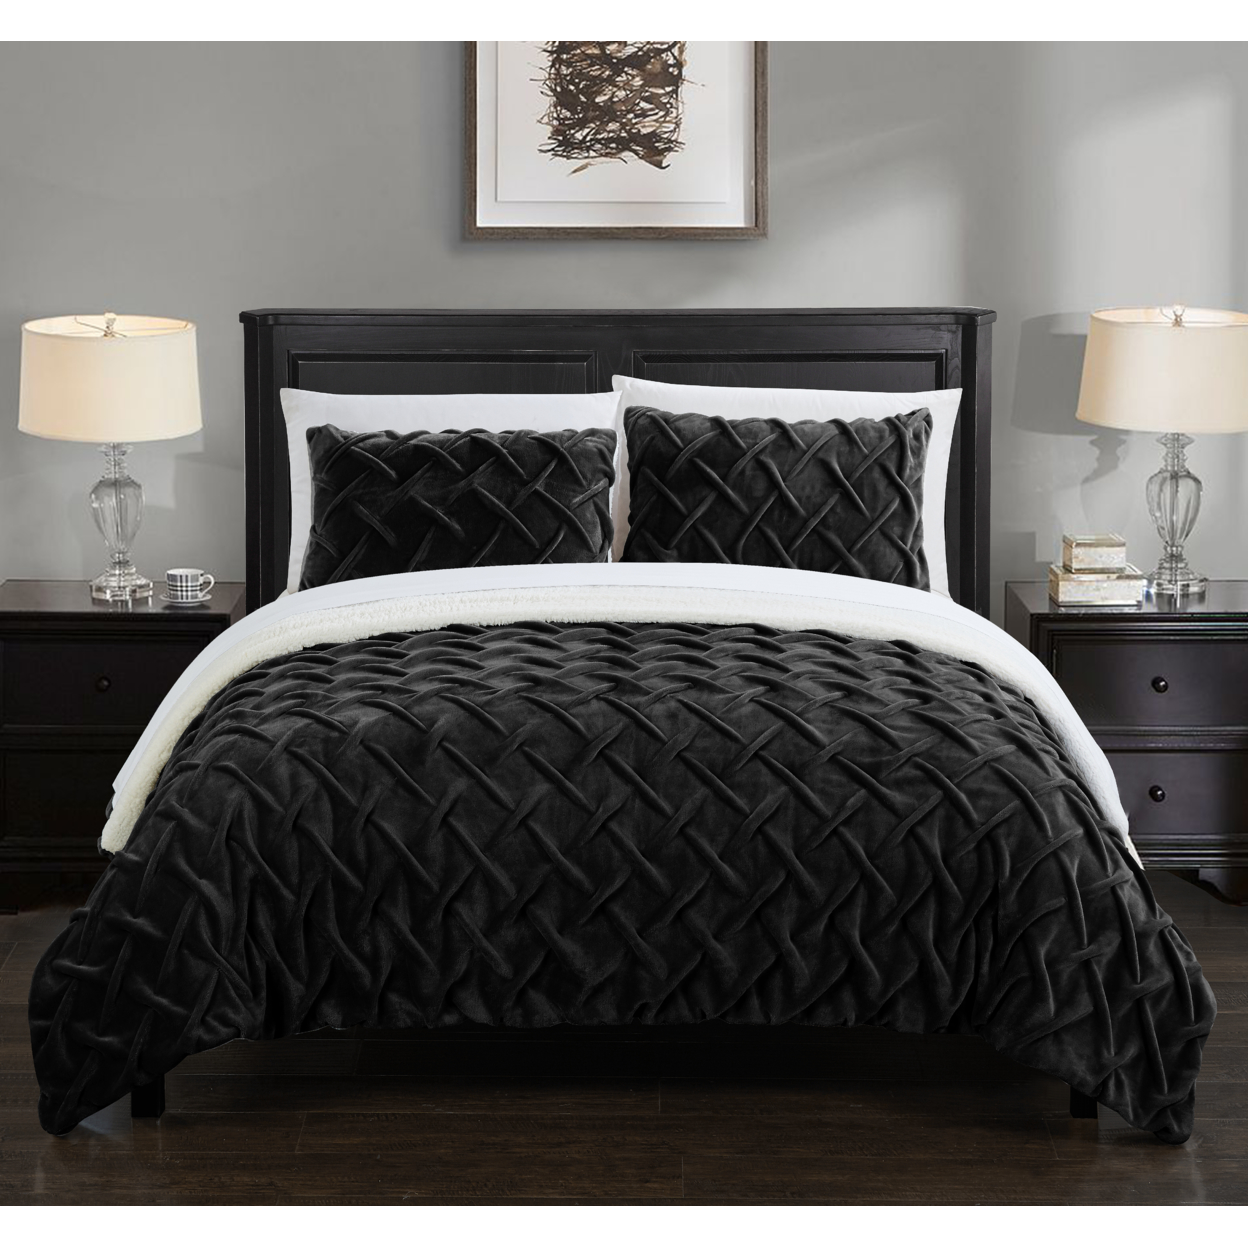 Thirsa 3 Or 2 Piece Comforter Set Ultra Plush Micro Mink Criss Cross Pinch Pleat Sherpa Lined Bedding - Black, Queen